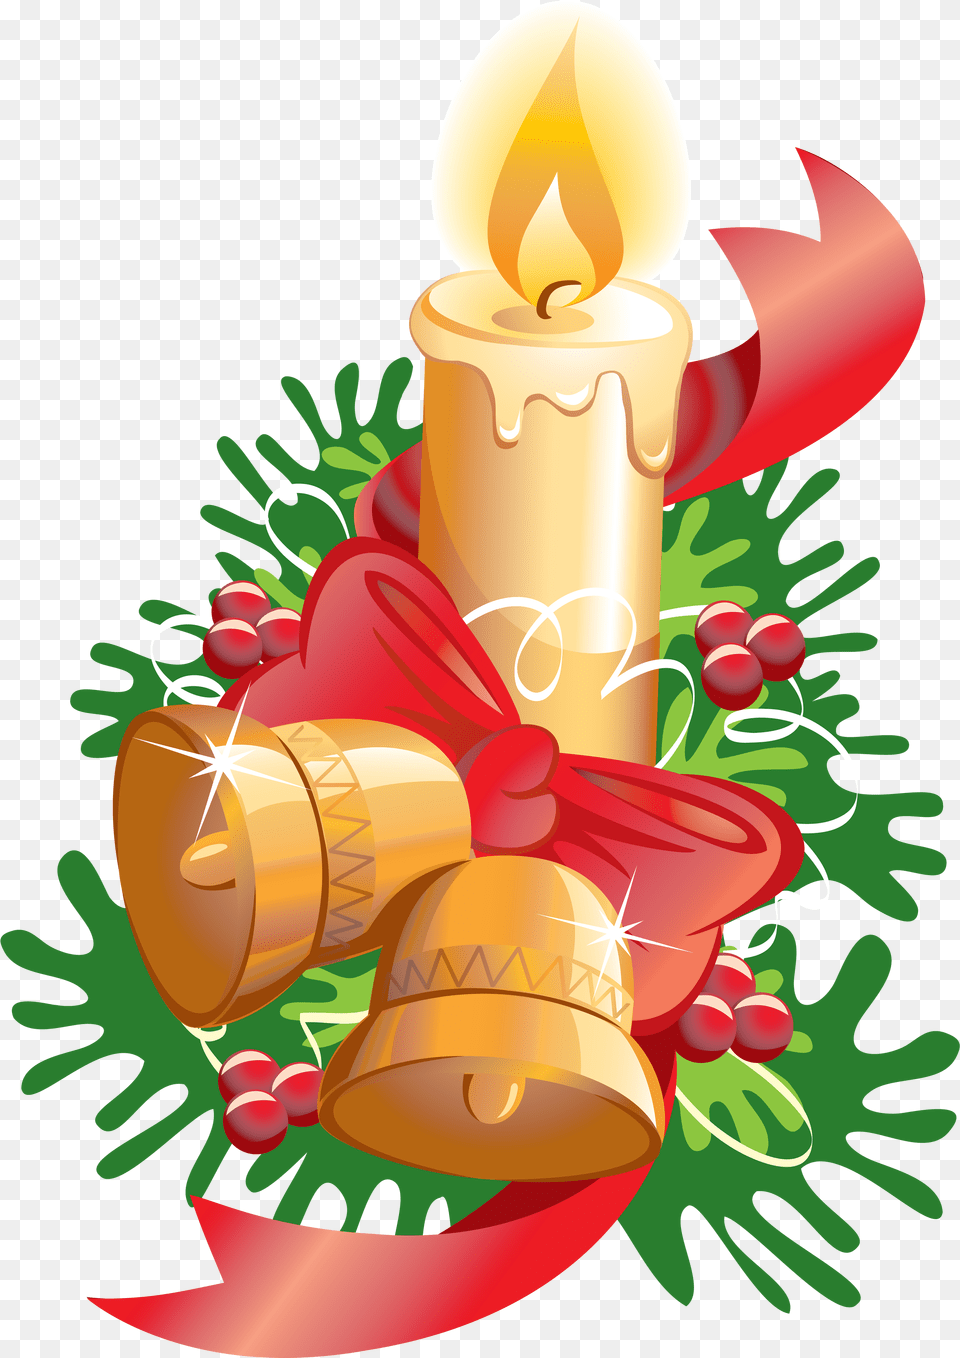 Download Christmas Candleu0027s Image For Christmas Candle With Bells, Dynamite, Weapon Free Png